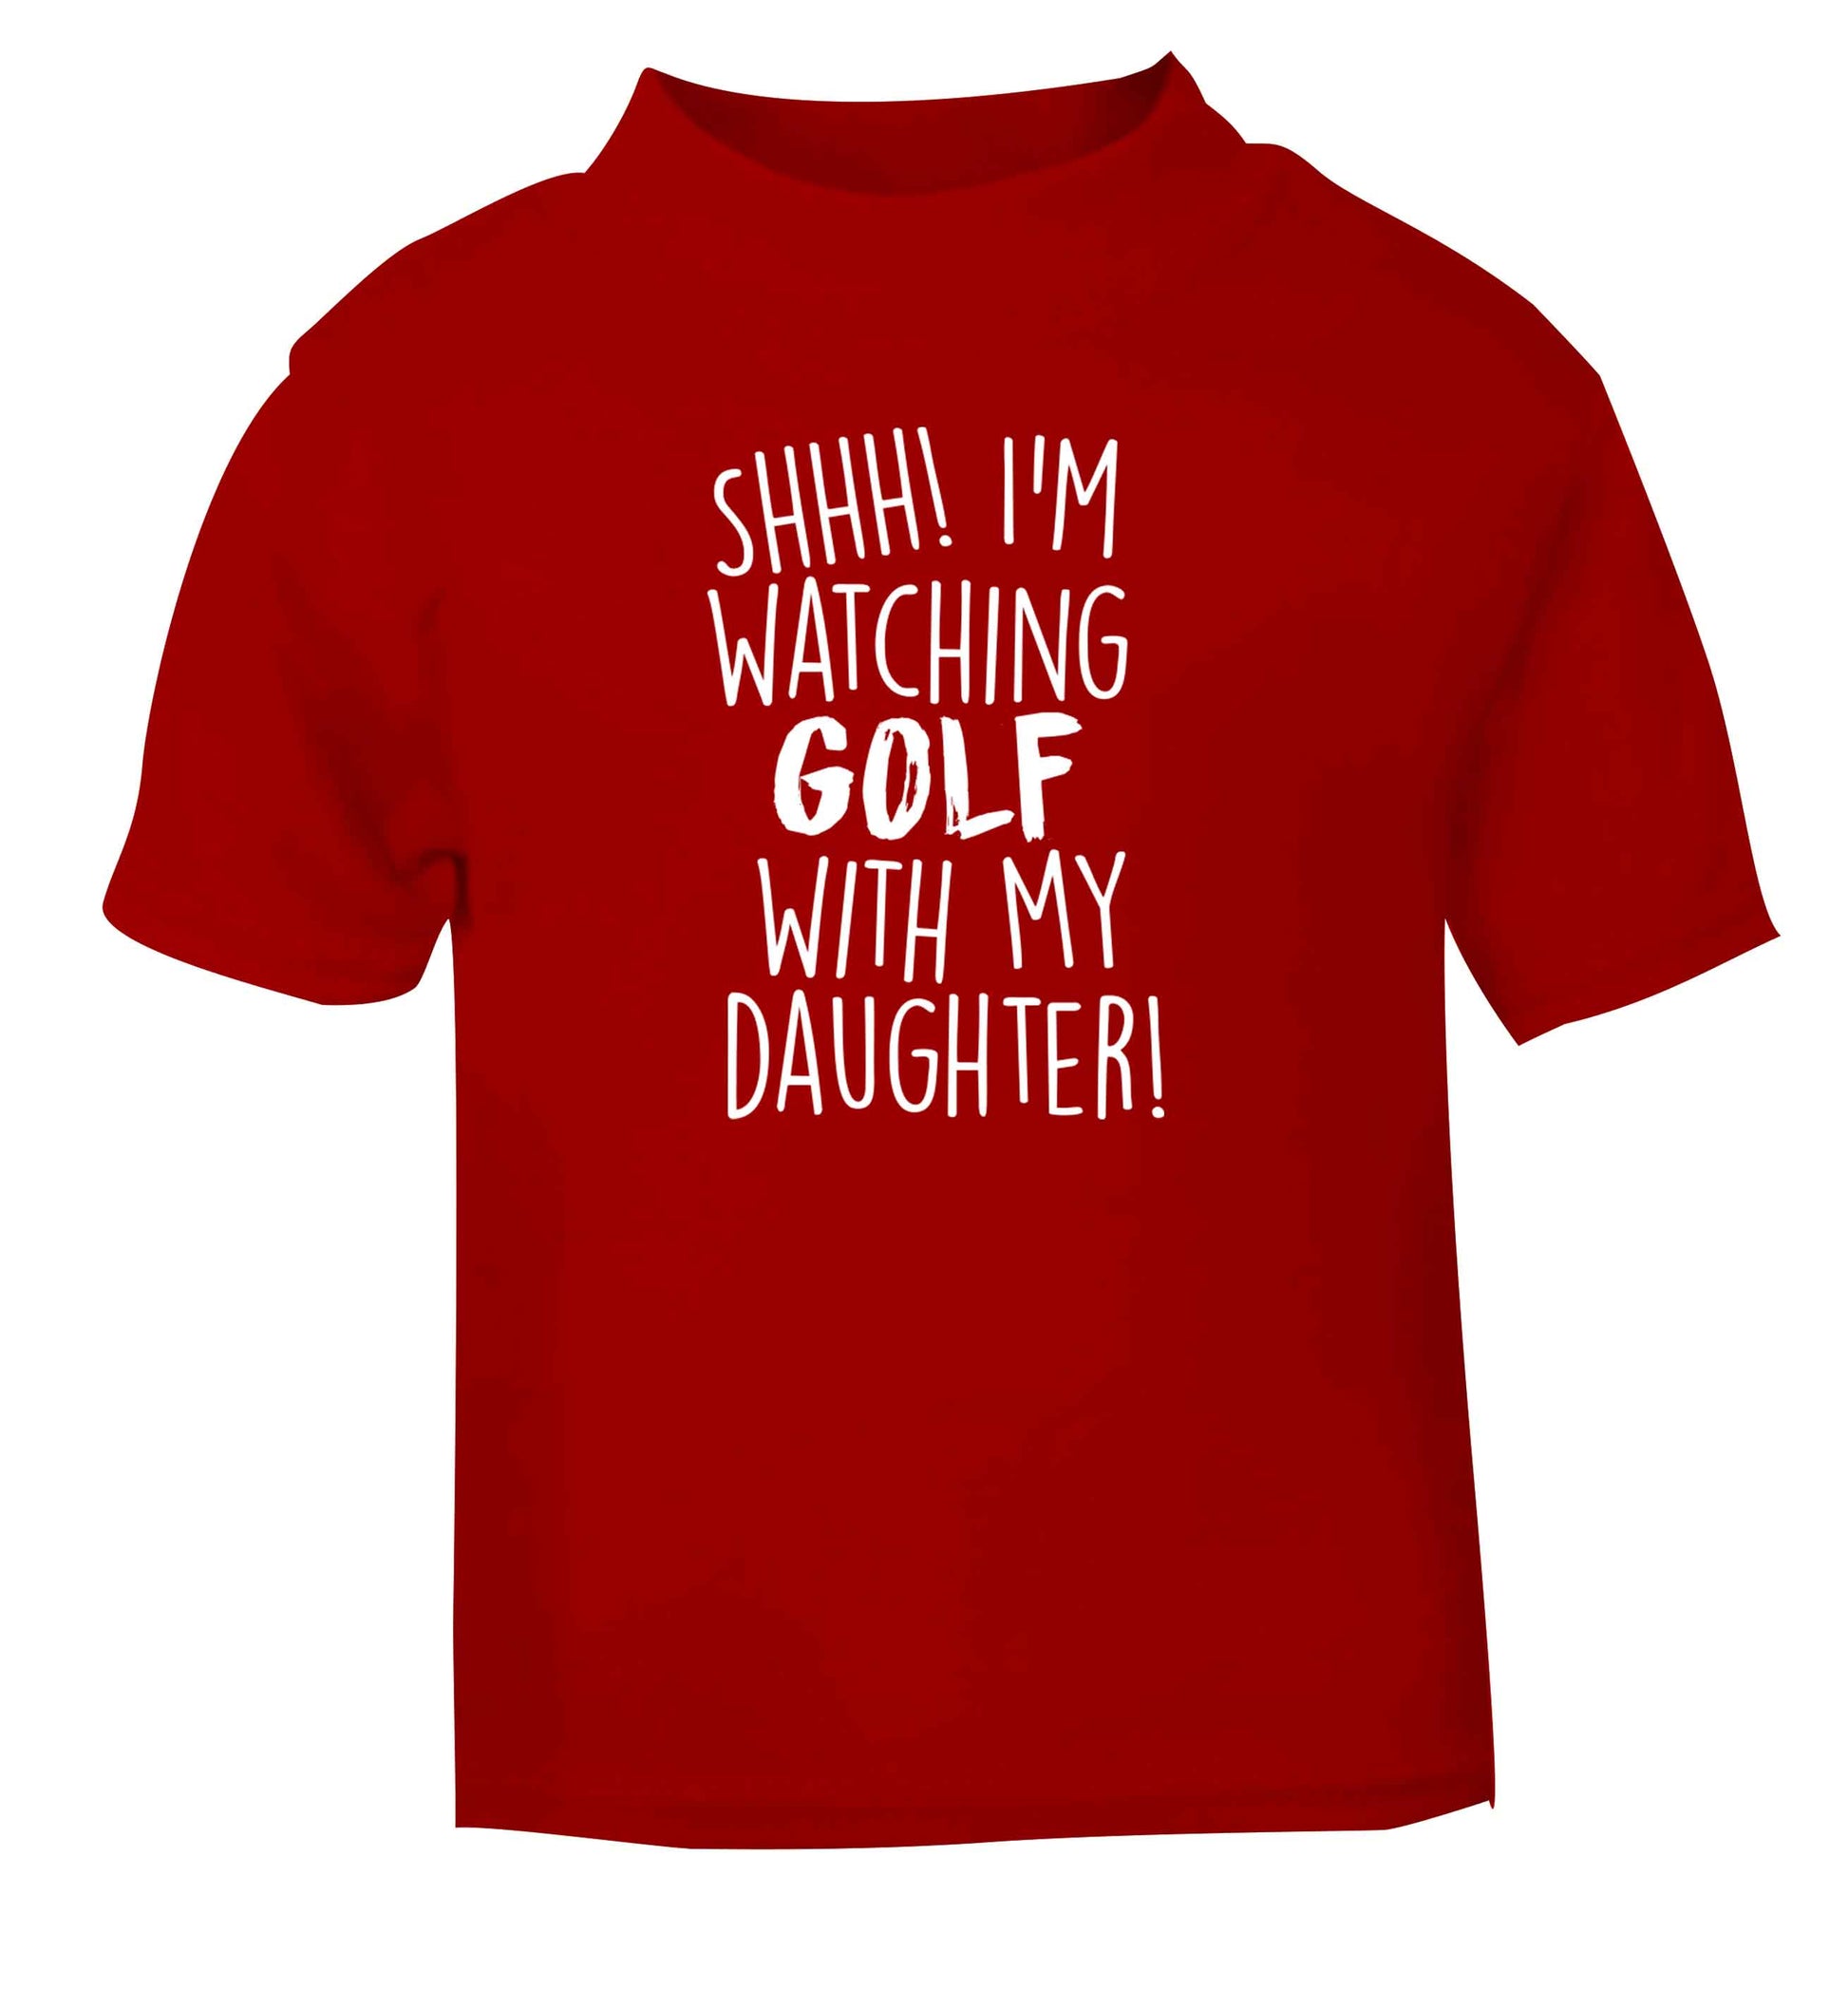 Shh I'm watching golf with my daughter red Baby Toddler Tshirt 2 Years